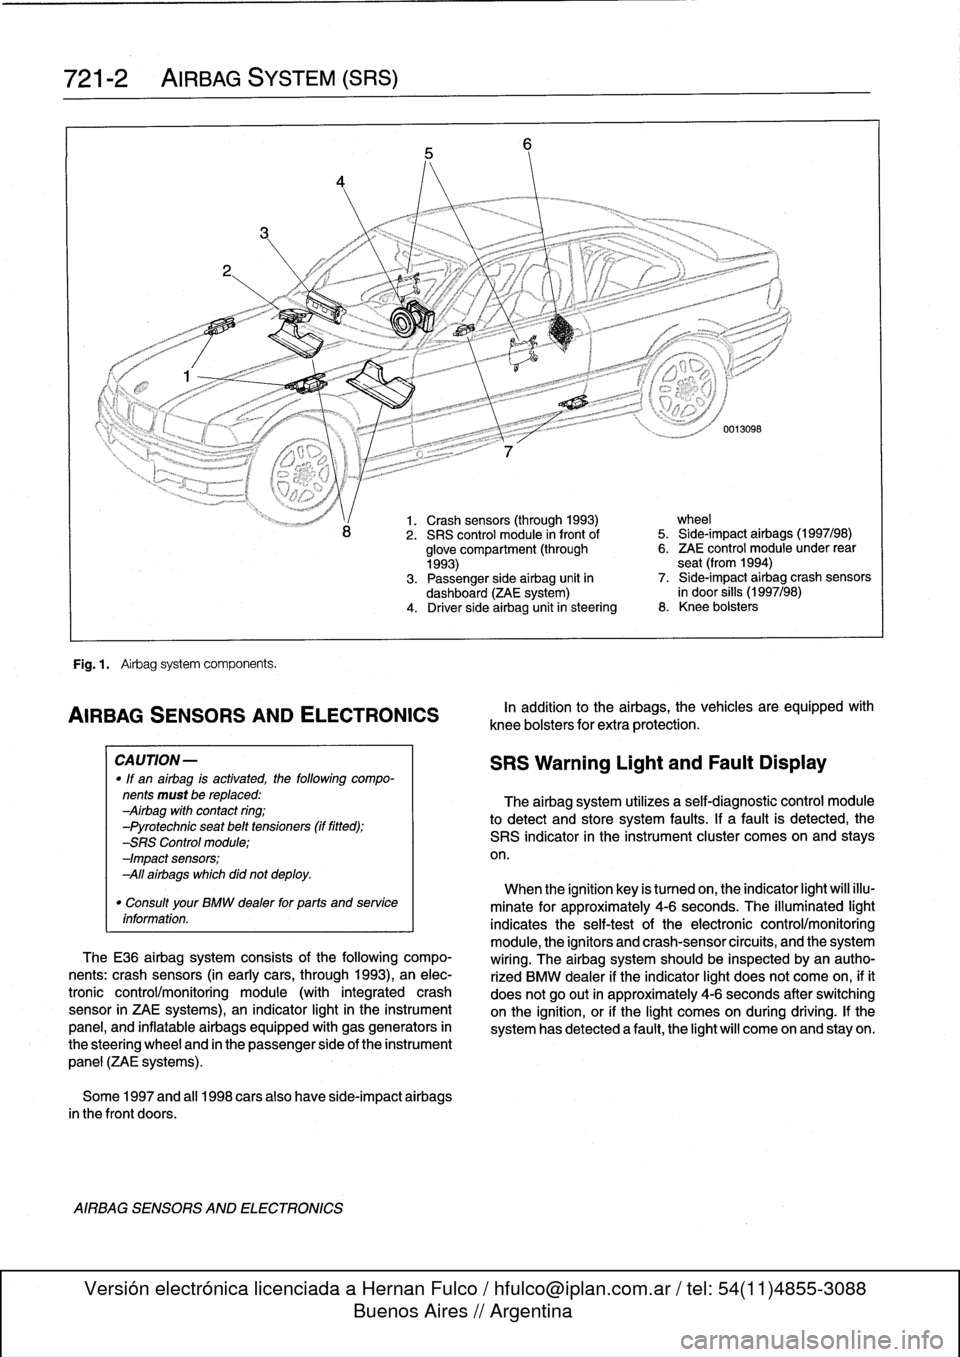 BMW 325i 1992 E36 Repair Manual 
721-2

	

AIRBAG
SYSTEM
(SRS)

Fig
.
1
.

	

Airbag
system
components
.

AIRBAG
SENSORSAND
ELECTRONICS

CA
UTION-

"
If
an
airbag
is
activated,
the
following
compo-
nents
must
be
replaced
:
Airbag
wi